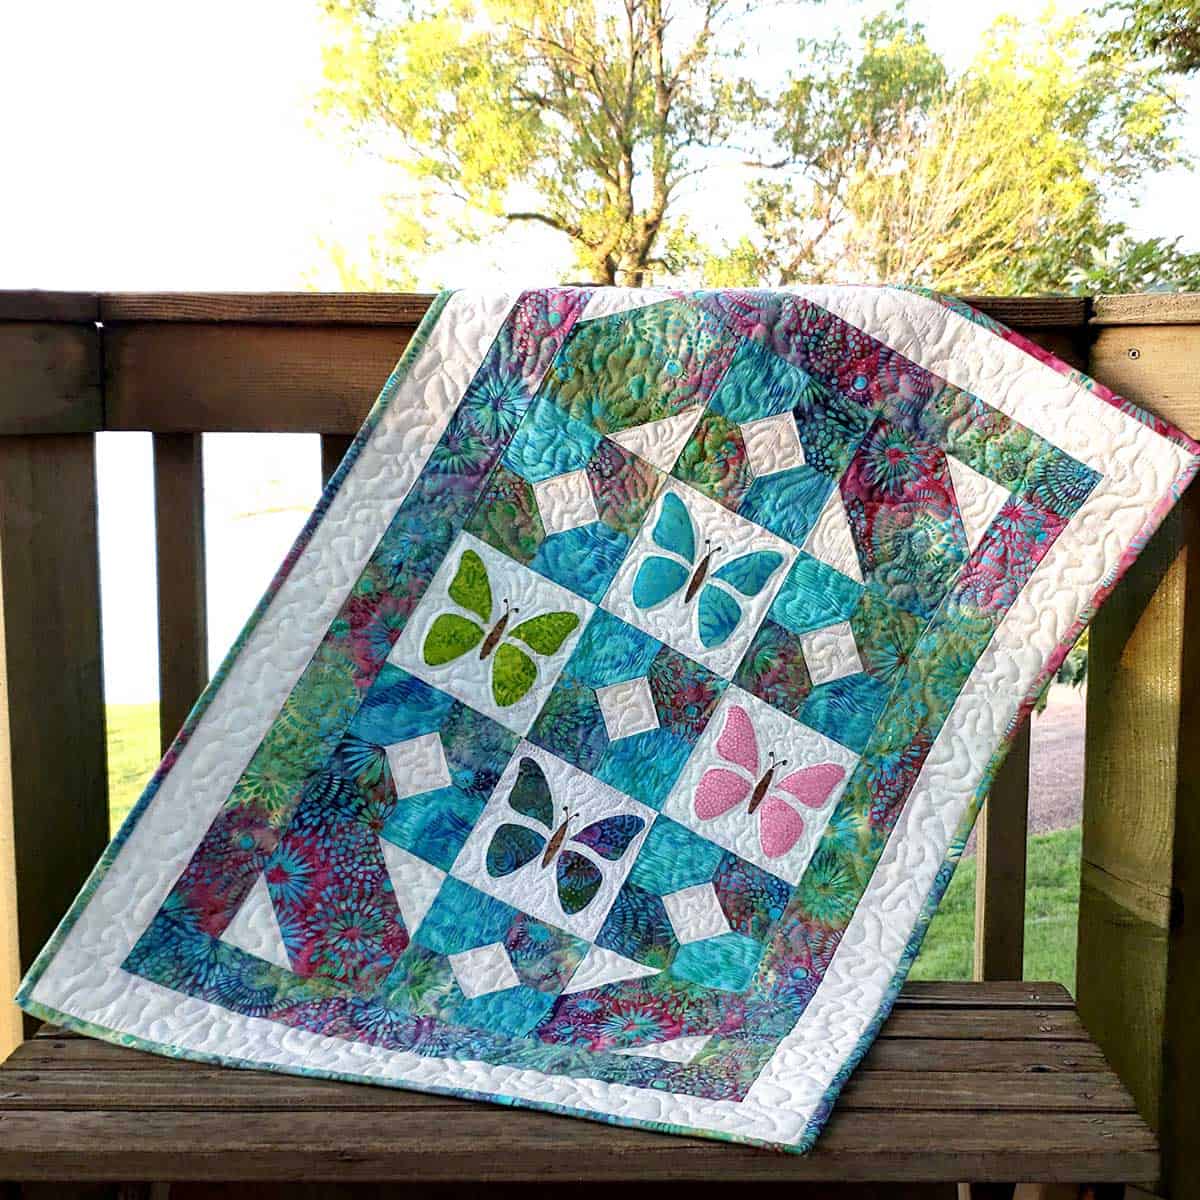 Butterfly Cage quilt on deck